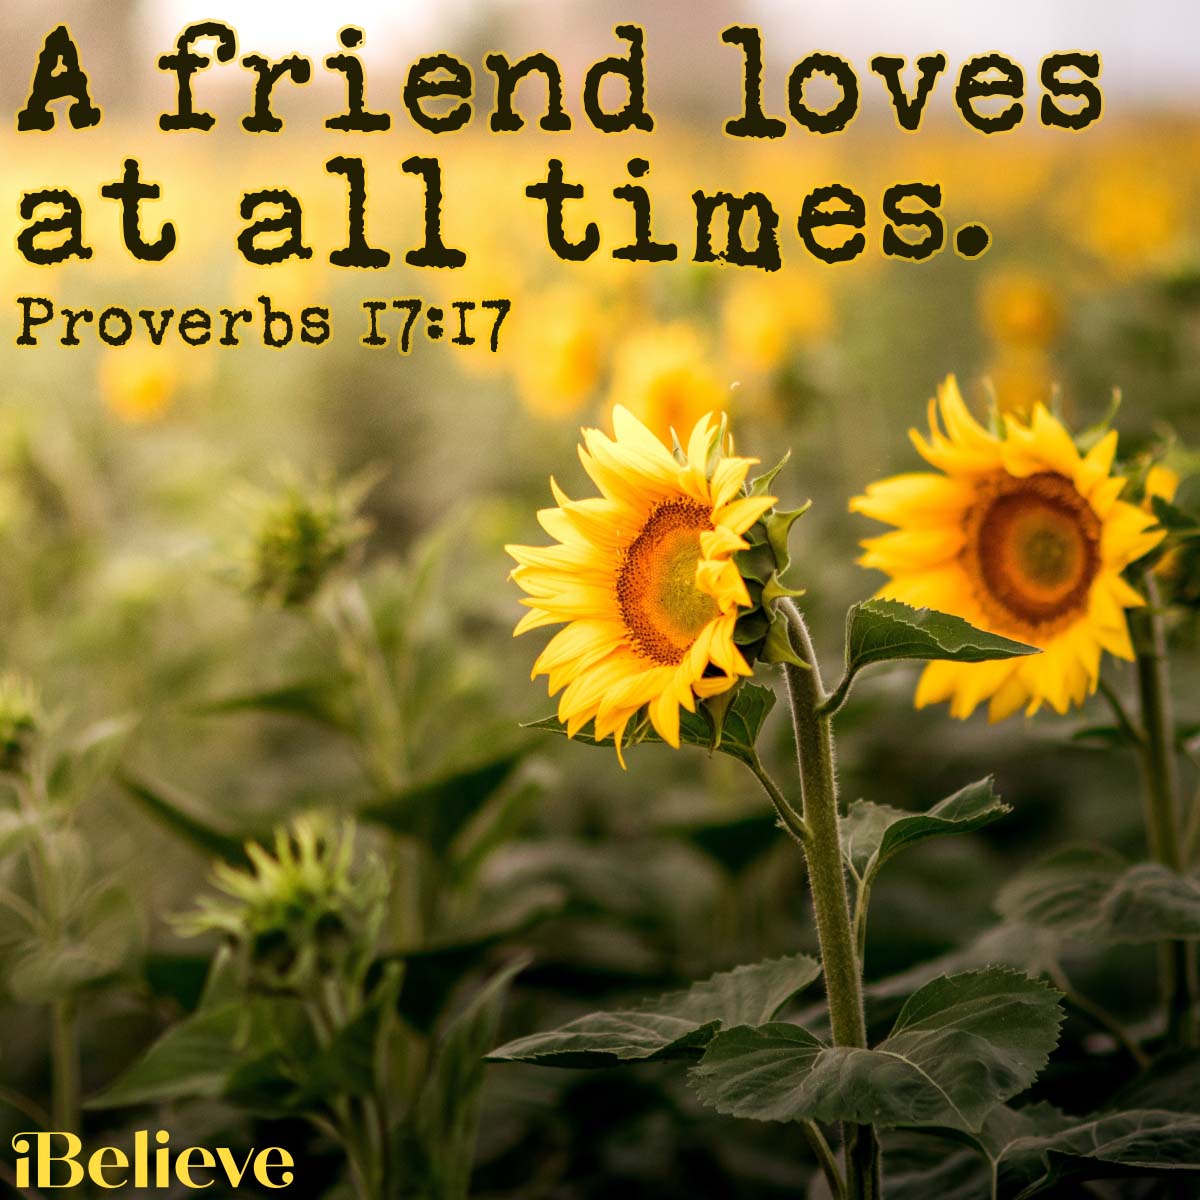 Proverbs 17:17, inspirational image